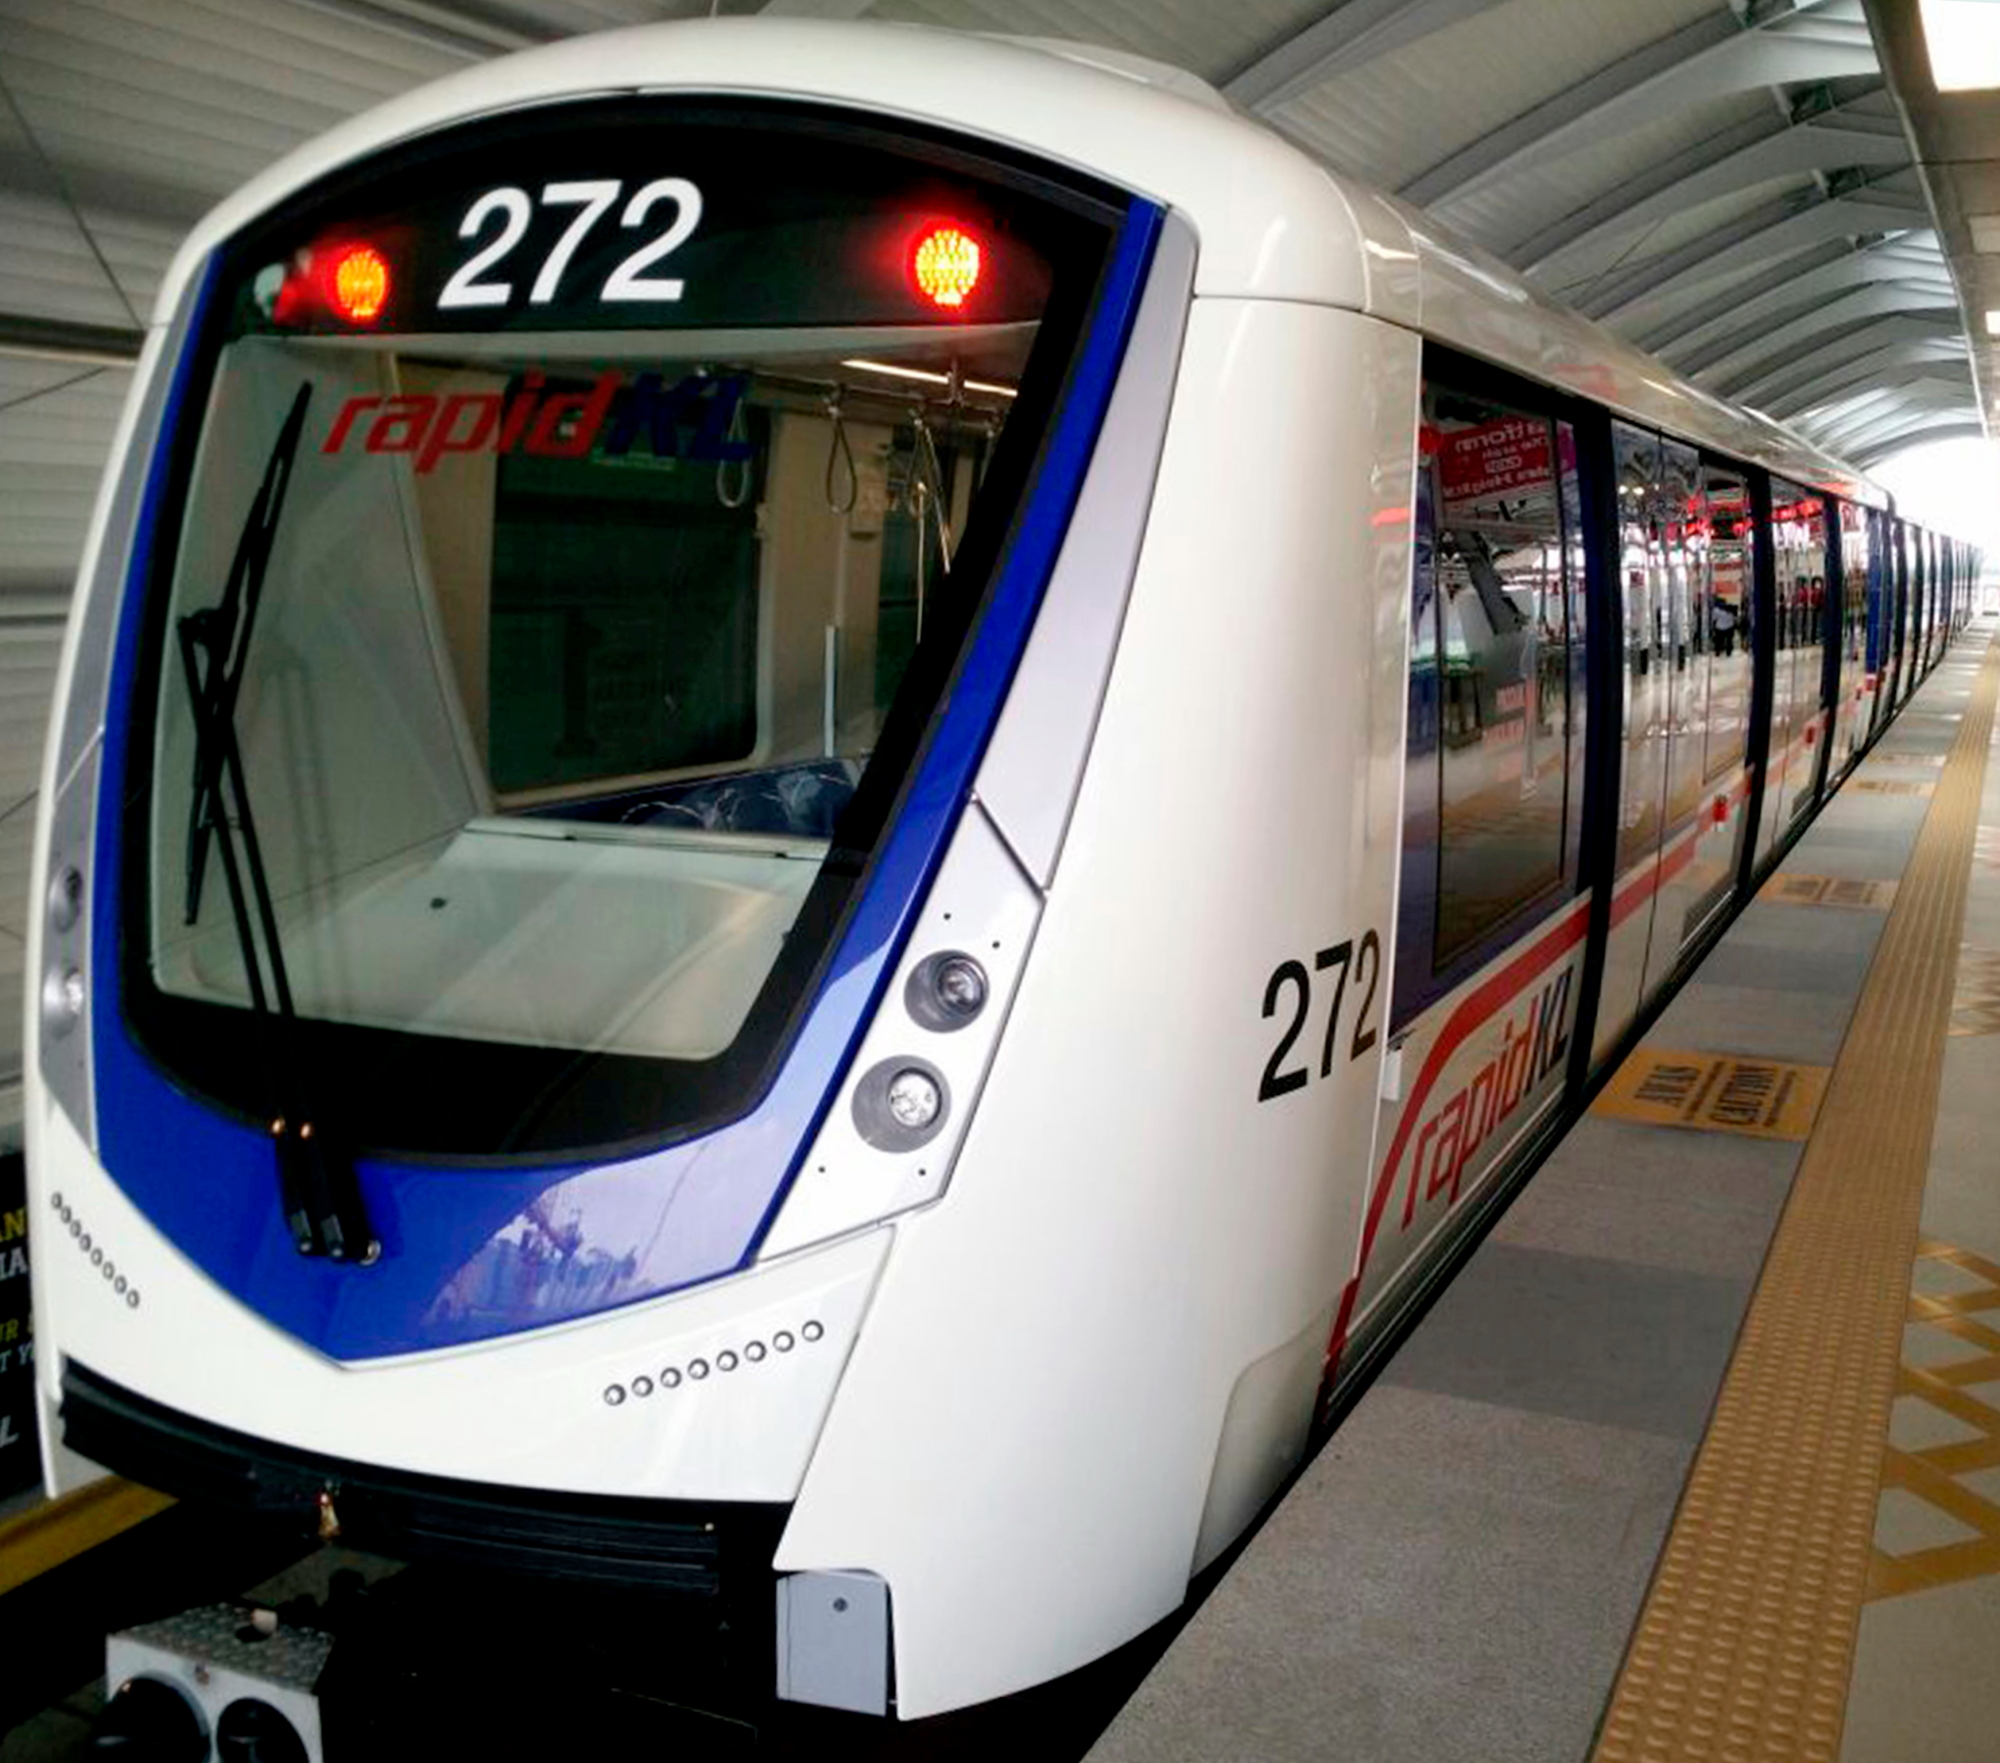 The driverless Bombardier Innovia Metro 300 trains can move up to 30,000 passengers per-hour, per-direction, and ridership on the Kelena Jaya Line has increased by 26% to over 270,000 passengers daily since early 2017. Click to enlarge.